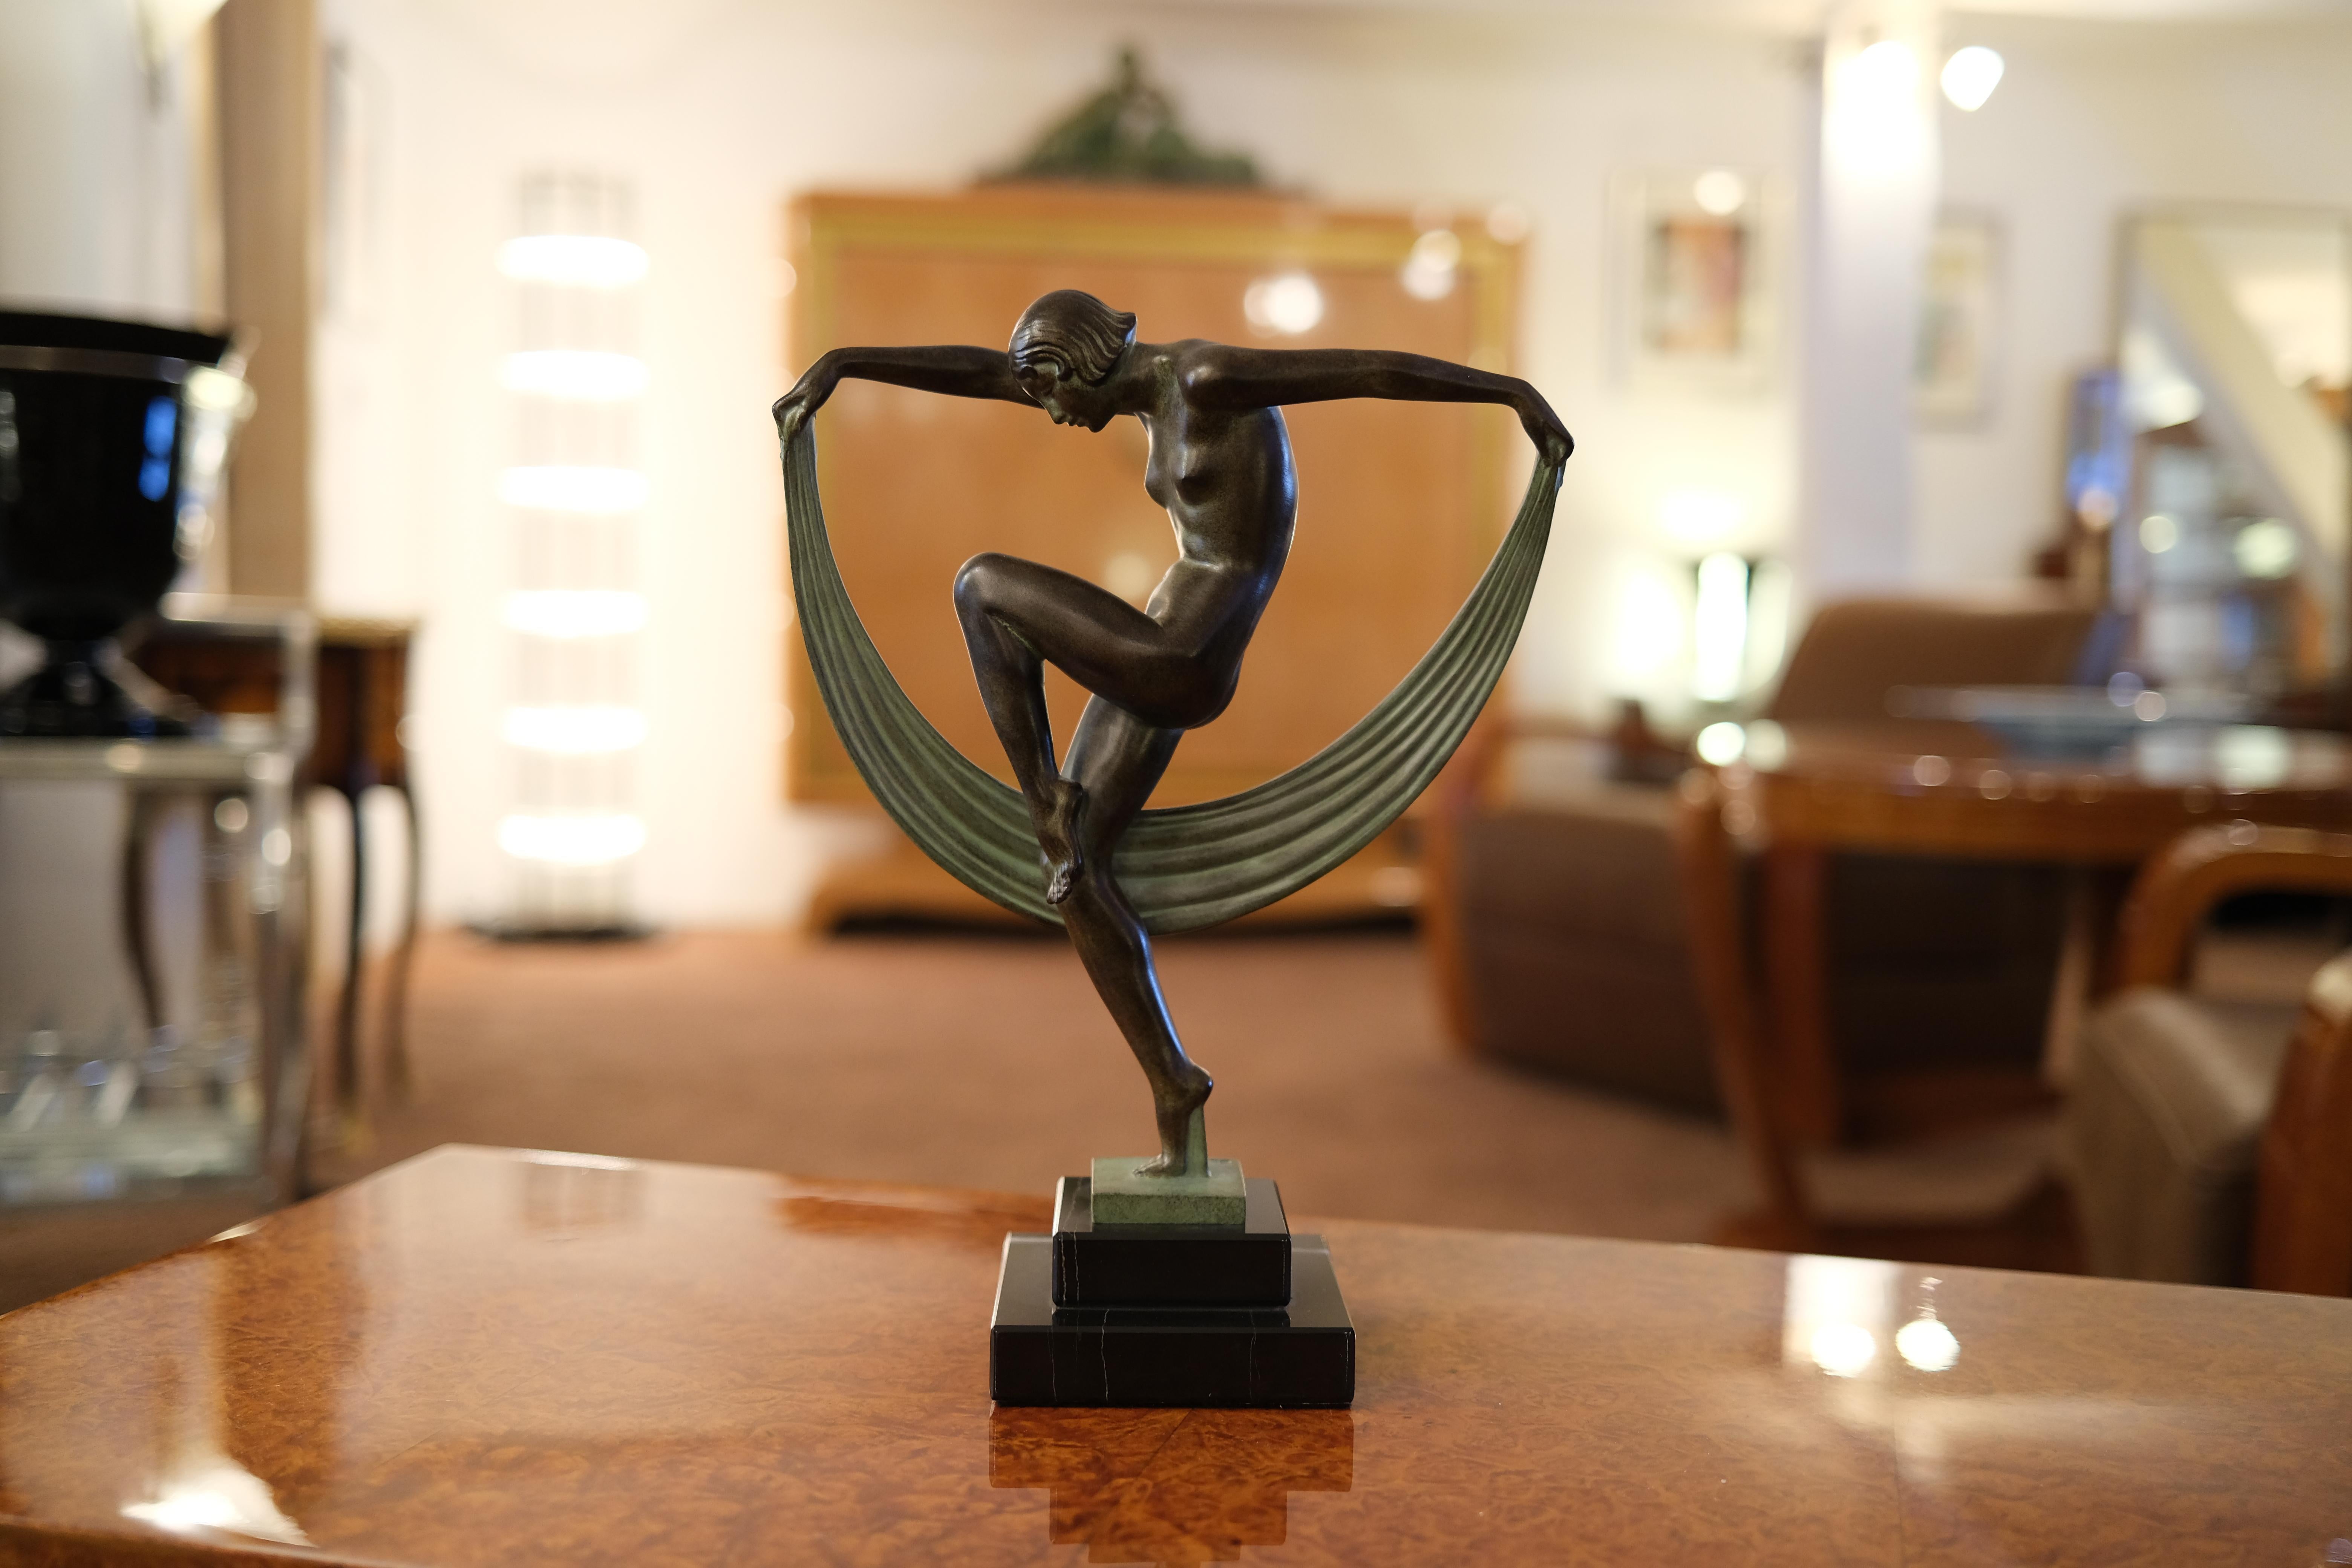 Sculpture dancing lady “Folie”
Designed in France during the roaring 1920s by “Maurice et Marcel Denis”, signed
Original Max Le Verrier, signed 
Art Deco style, France

Material: 
Régule (Spelter) 
Socle in black marble (could have a different